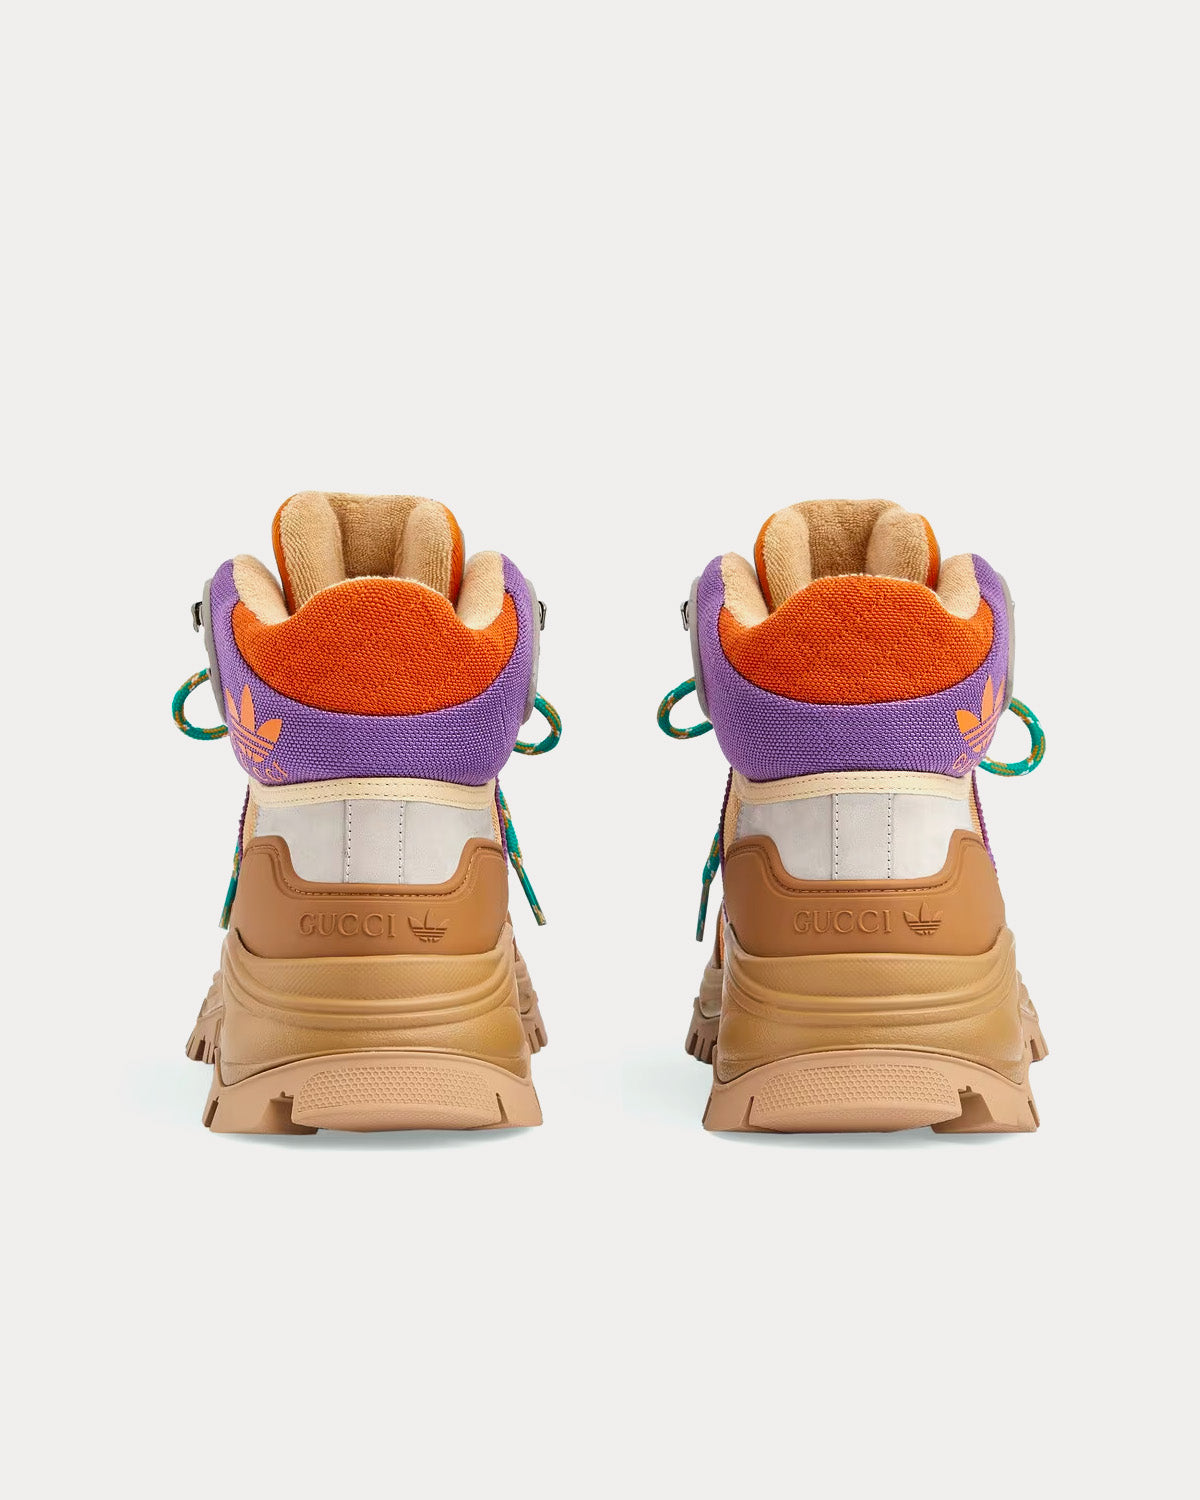 Adidas x Gucci - Lace-Up Technical Canvas Beige / Orange / Purple High Top Sneakers